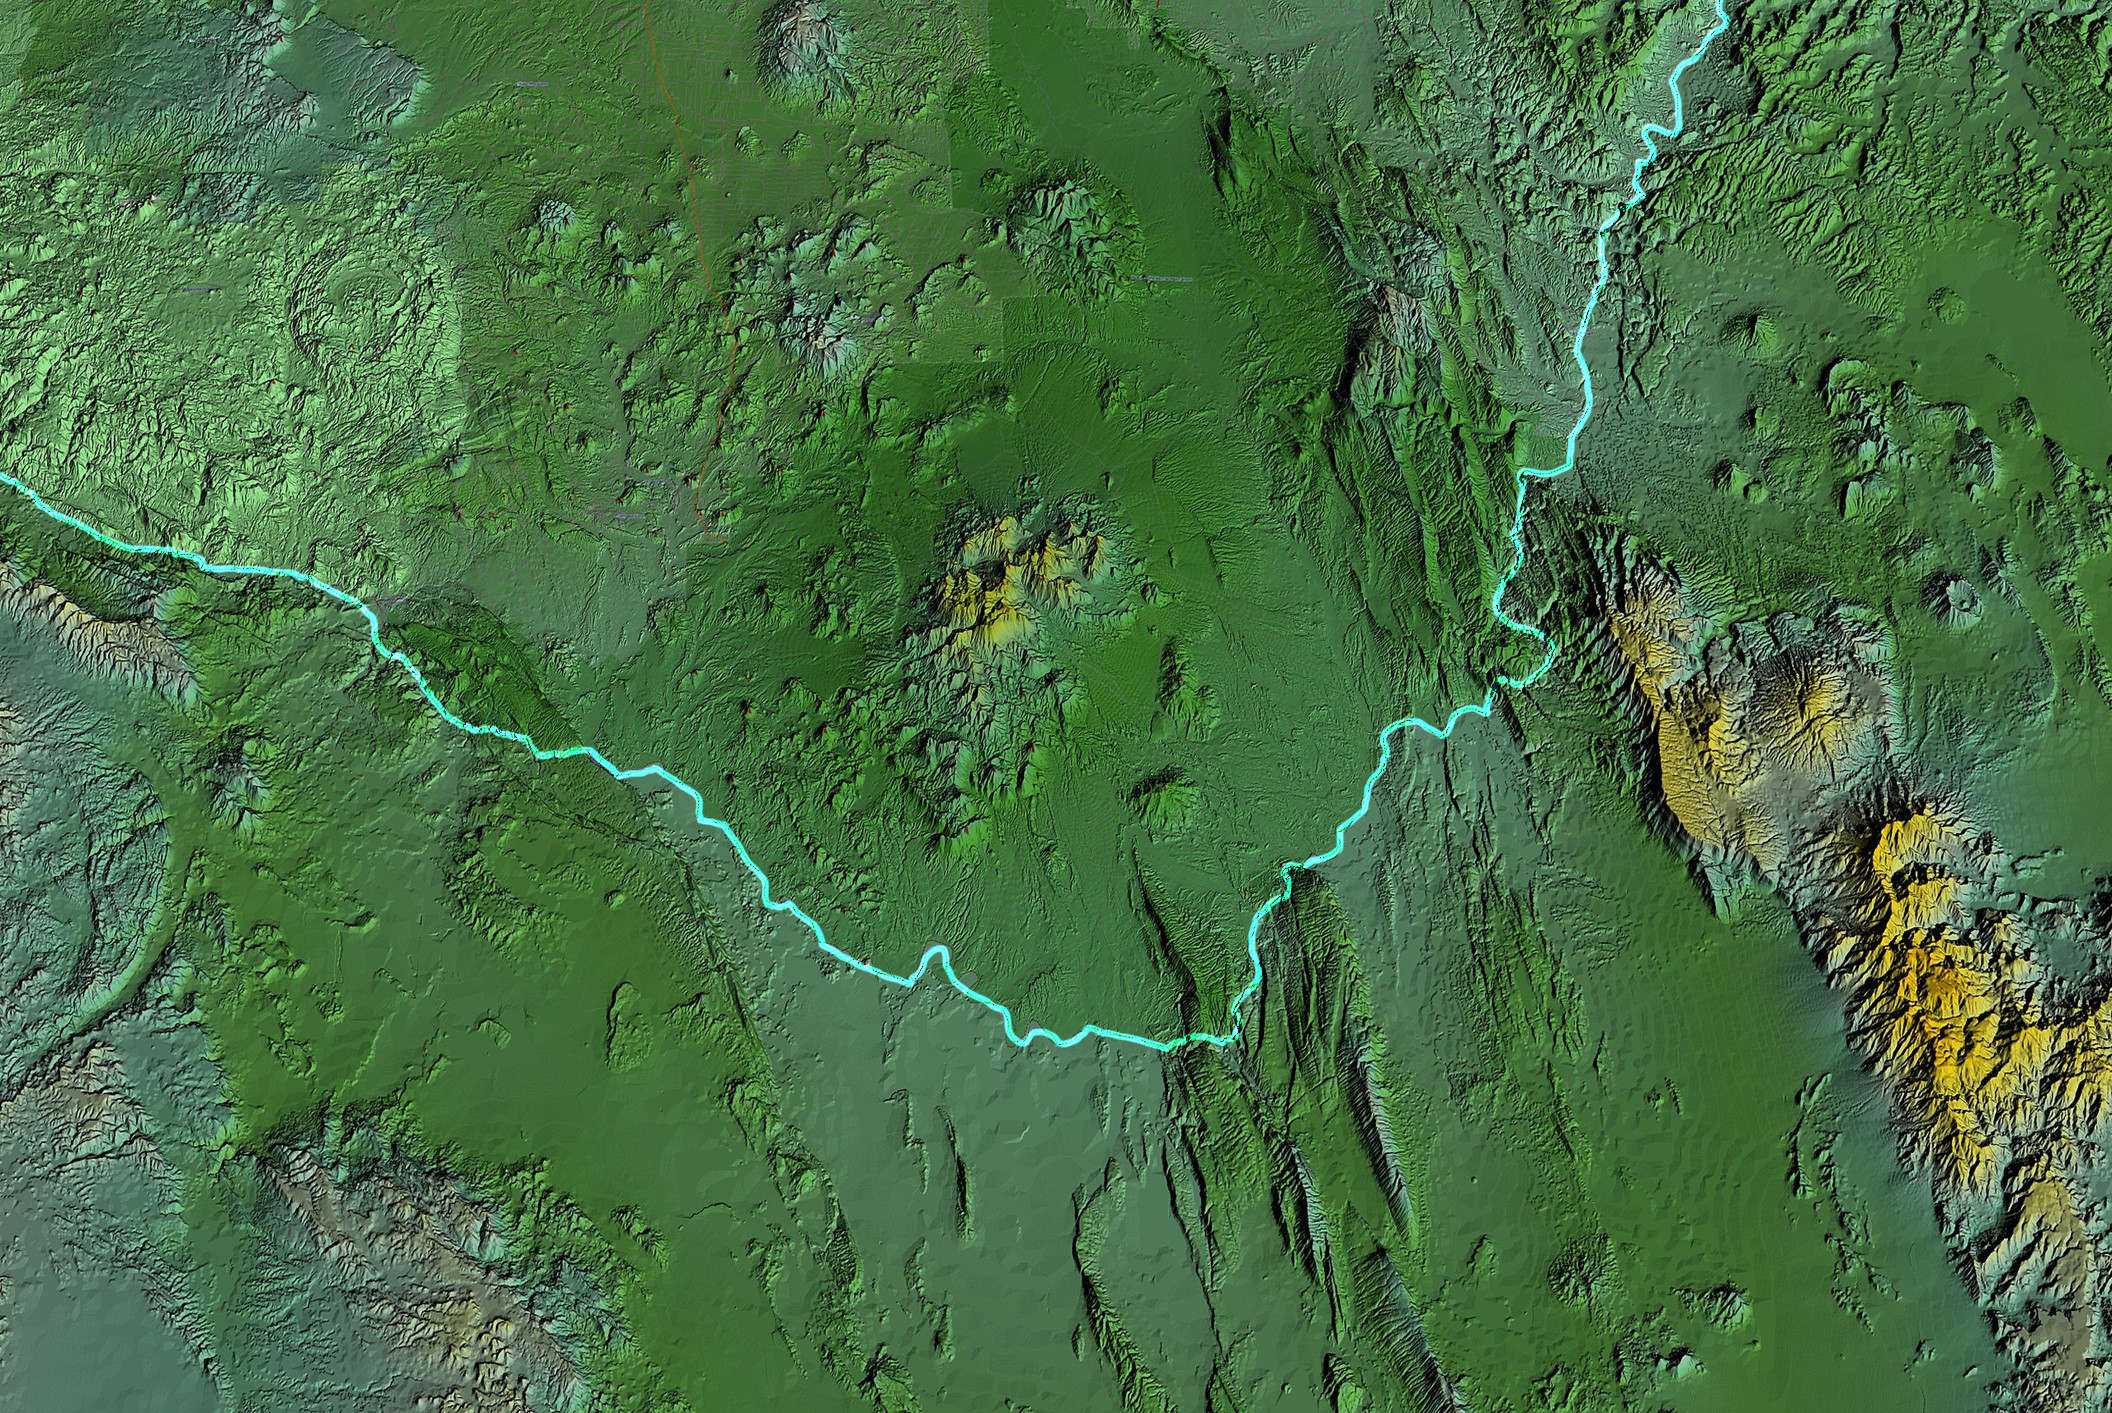 A digital elevation model of the area